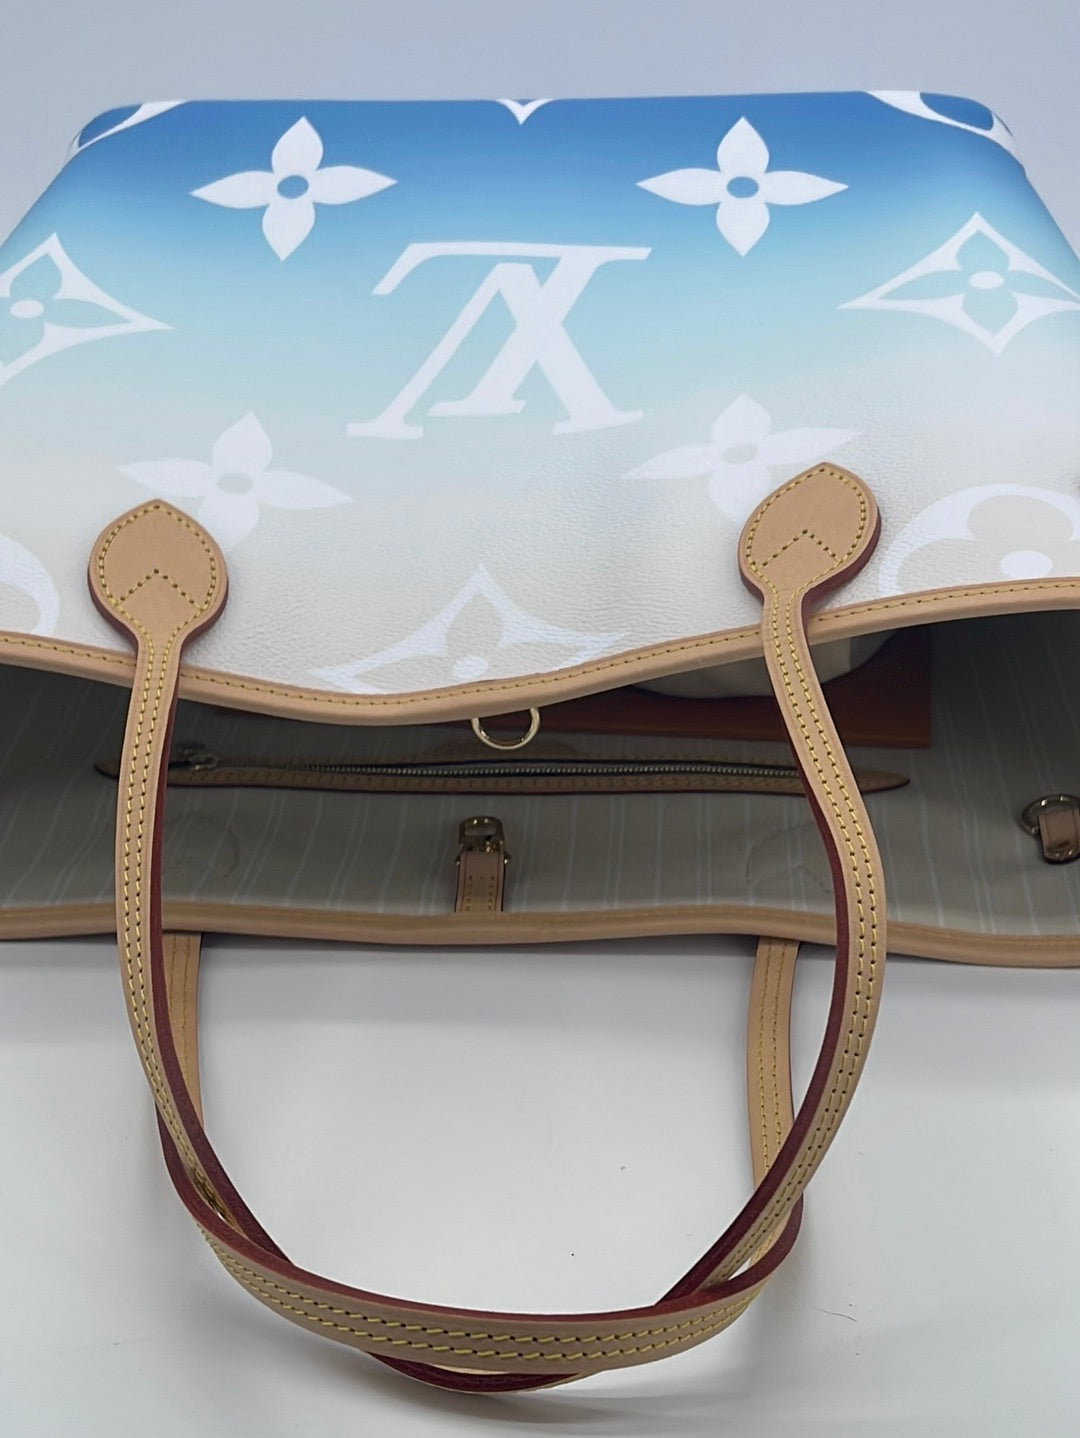 Like New) Limited Edition Louis Vuitton Neverfull MM By the Pool